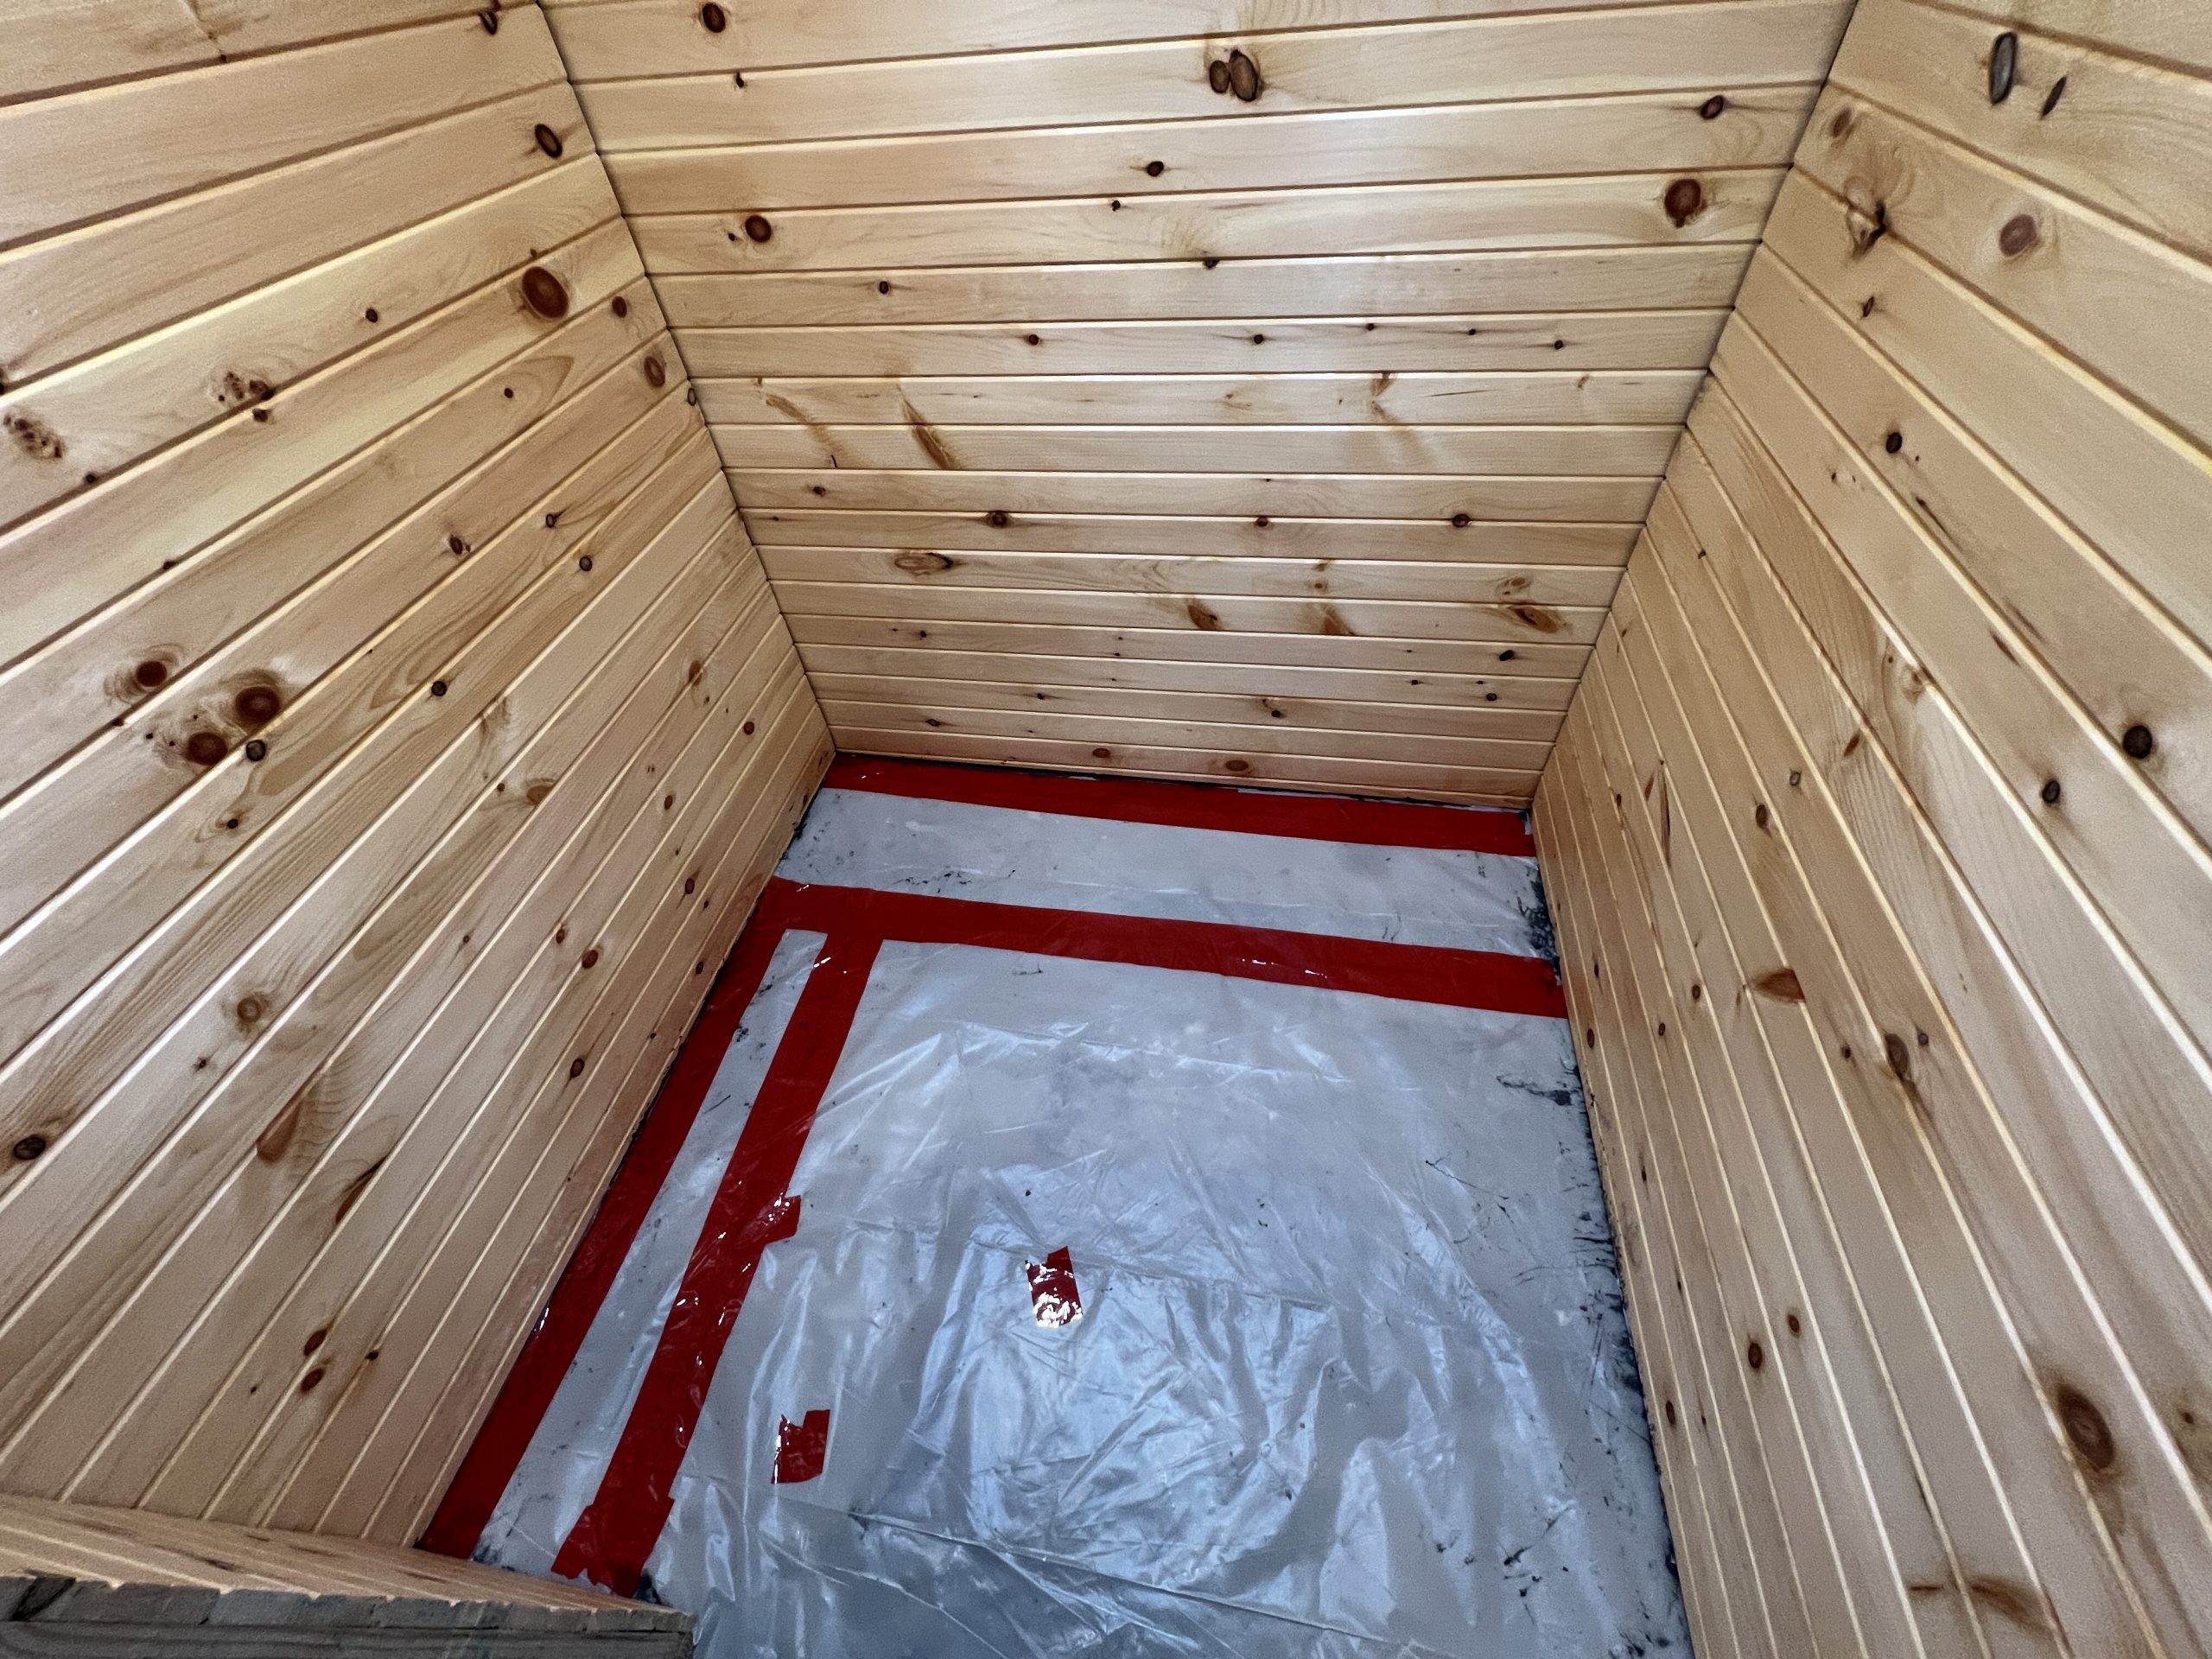 A vapor barrier made of 6 mil plastic sheeting applied to the floor, reinforced with red tape.